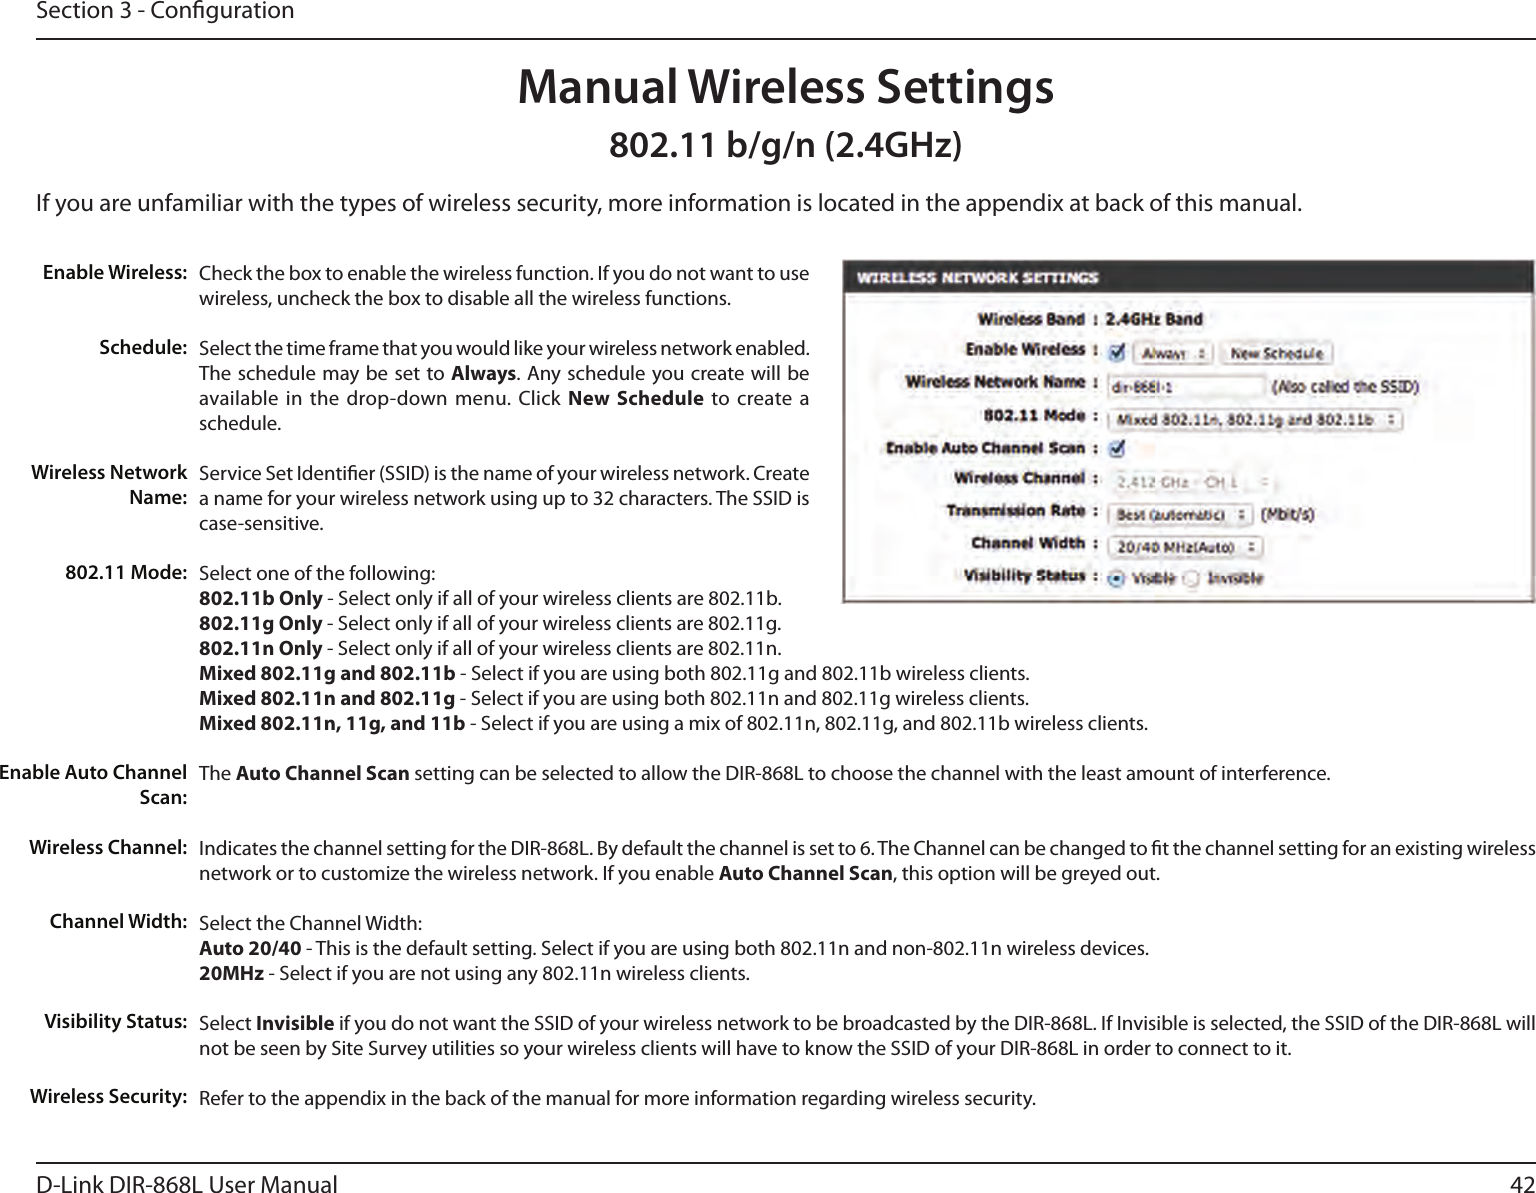 42D-Link DIR-868L User ManualSection 3 - CongurationCheck the box to enable the wireless function. If you do not want to use wireless, uncheck the box to disable all the wireless functions.Select the time frame that you would like your wireless network enabled. The schedule may be set to Always. Any schedule you create will be available in  the  drop-down menu. Click  New  Schedule  to  create  a schedule.Service Set Identier (SSID) is the name of your wireless network. Create a name for your wireless network using up to 32 characters. The SSID is case-sensitive.Select one of the following:802.11b Only - Select only if all of your wireless clients are 802.11b.802.11g Only - Select only if all of your wireless clients are 802.11g.802.11n Only - Select only if all of your wireless clients are 802.11n.Mixed 802.11g and 802.11b - Select if you are using both 802.11g and 802.11b wireless clients.Mixed 802.11n and 802.11g - Select if you are using both 802.11n and 802.11g wireless clients.Mixed 802.11n, 11g, and 11b - Select if you are using a mix of 802.11n, 802.11g, and 802.11b wireless clients.The Auto Channel Scan setting can be selected to allow the DIR-868L to choose the channel with the least amount of interference.Indicates the channel setting for the DIR-868L. By default the channel is set to 6. The Channel can be changed to t the channel setting for an existing wireless network or to customize the wireless network. If you enable Auto Channel Scan, this option will be greyed out.Select the Channel Width:Auto 20/40 - This is the default setting. Select if you are using both 802.11n and non-802.11n wireless devices.20MHz - Select if you are not using any 802.11n wireless clients.Select Invisible if you do not want the SSID of your wireless network to be broadcasted by the DIR-868L. If Invisible is selected, the SSID of the DIR-868L will not be seen by Site Survey utilities so your wireless clients will have to know the SSID of your DIR-868L in order to connect to it.Refer to the appendix in the back of the manual for more information regarding wireless security.Enable Wireless:Schedule:Wireless Network Name:802.11 Mode:Enable Auto Channel Scan:Wireless Channel:Manual Wireless SettingsChannel Width:Visibility Status:Wireless Security:802.11 b/g/n (2.4GHz)If you are unfamiliar with the types of wireless security, more information is located in the appendix at back of this manual.